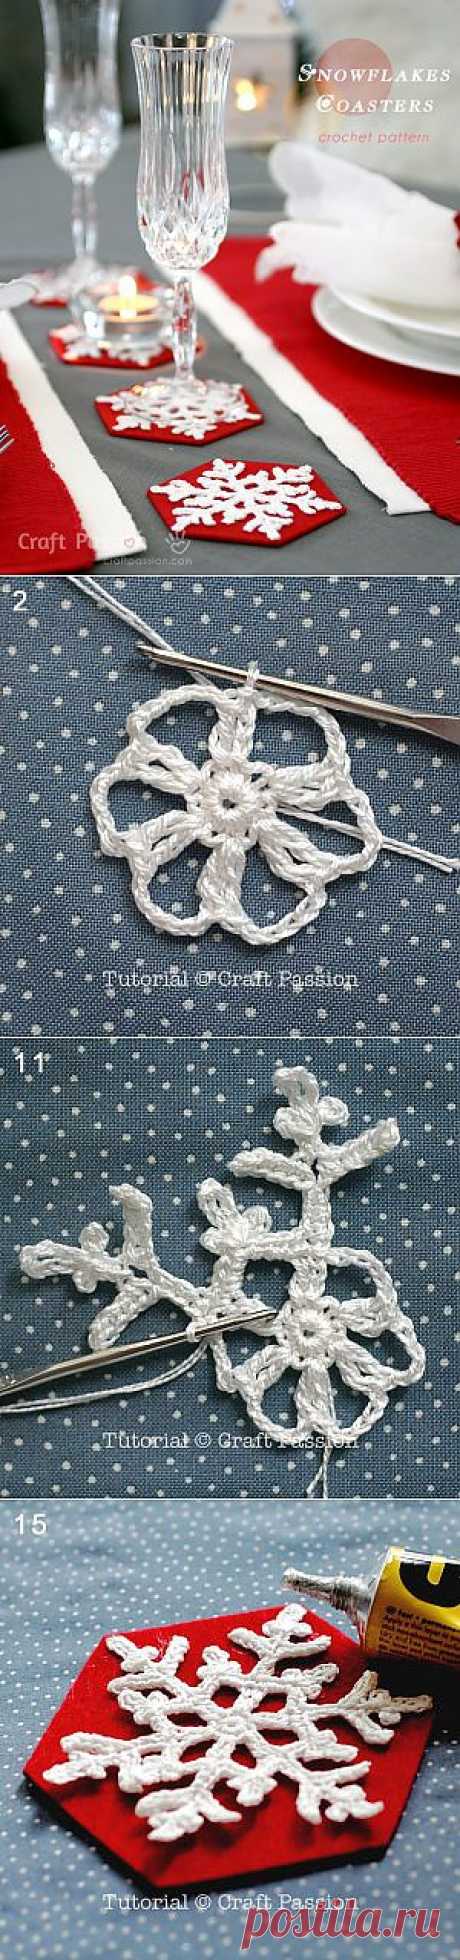 Crochet | Snowflakes Coasters | Free Pattern &amp;amp; Tutorial at CraftPassion.com - Part 2